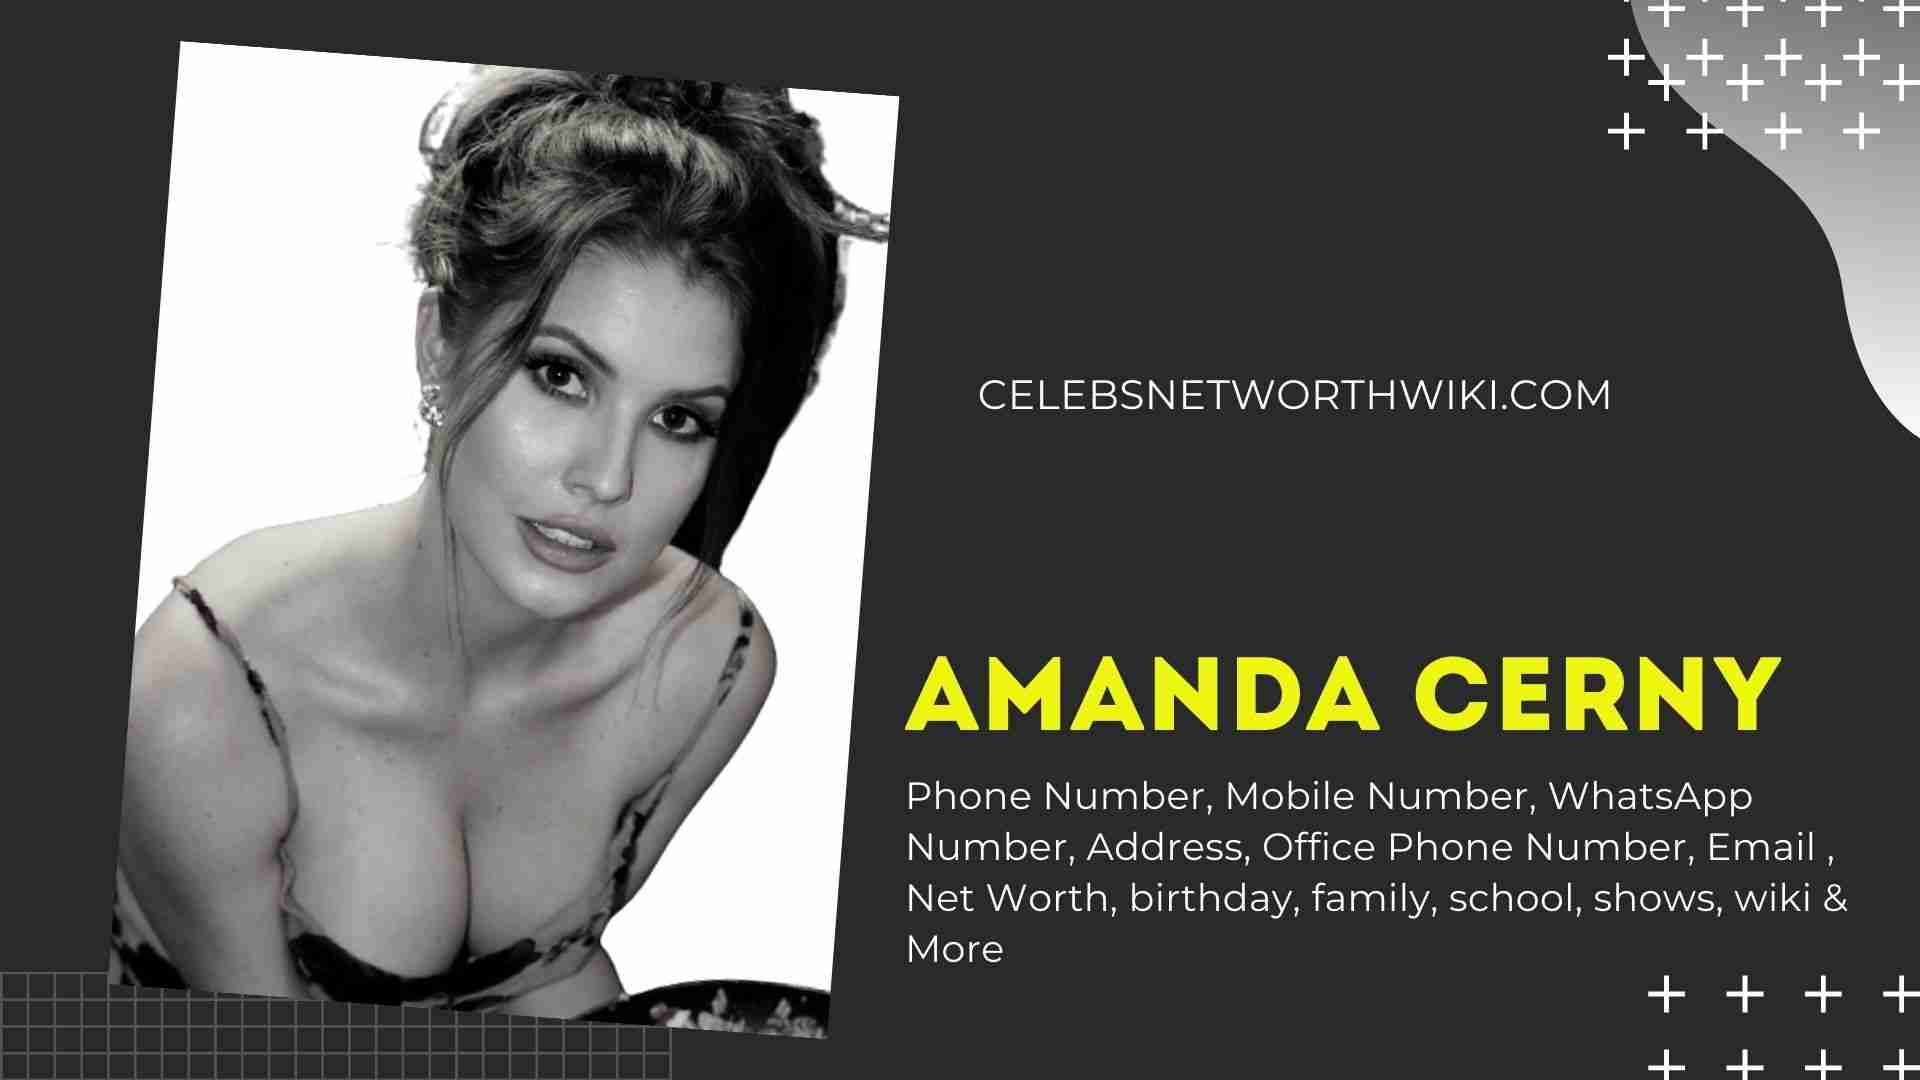 Amanda Cerny Phone Number Texting Number Contact Number Mobile.